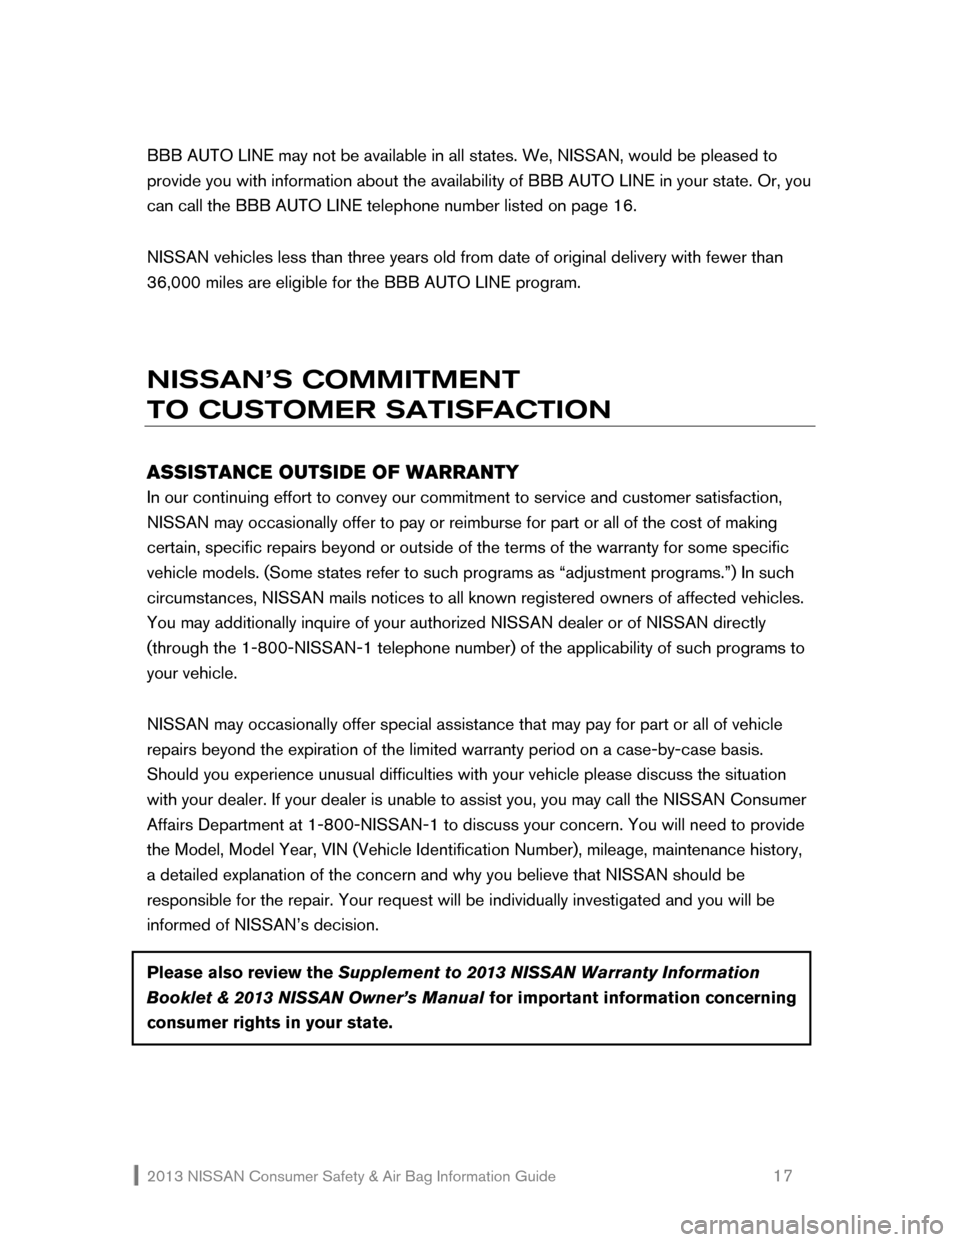 NISSAN 370Z COUPE 2013 Z34 Consumer Safety Air Bag Information Guide 2013 NISSAN Consumer Safety & Air Bag Information Guide                                                   17 
BBB AUTO LINE may not be available in all states. We, NISSAN, would be pleased to 
provide